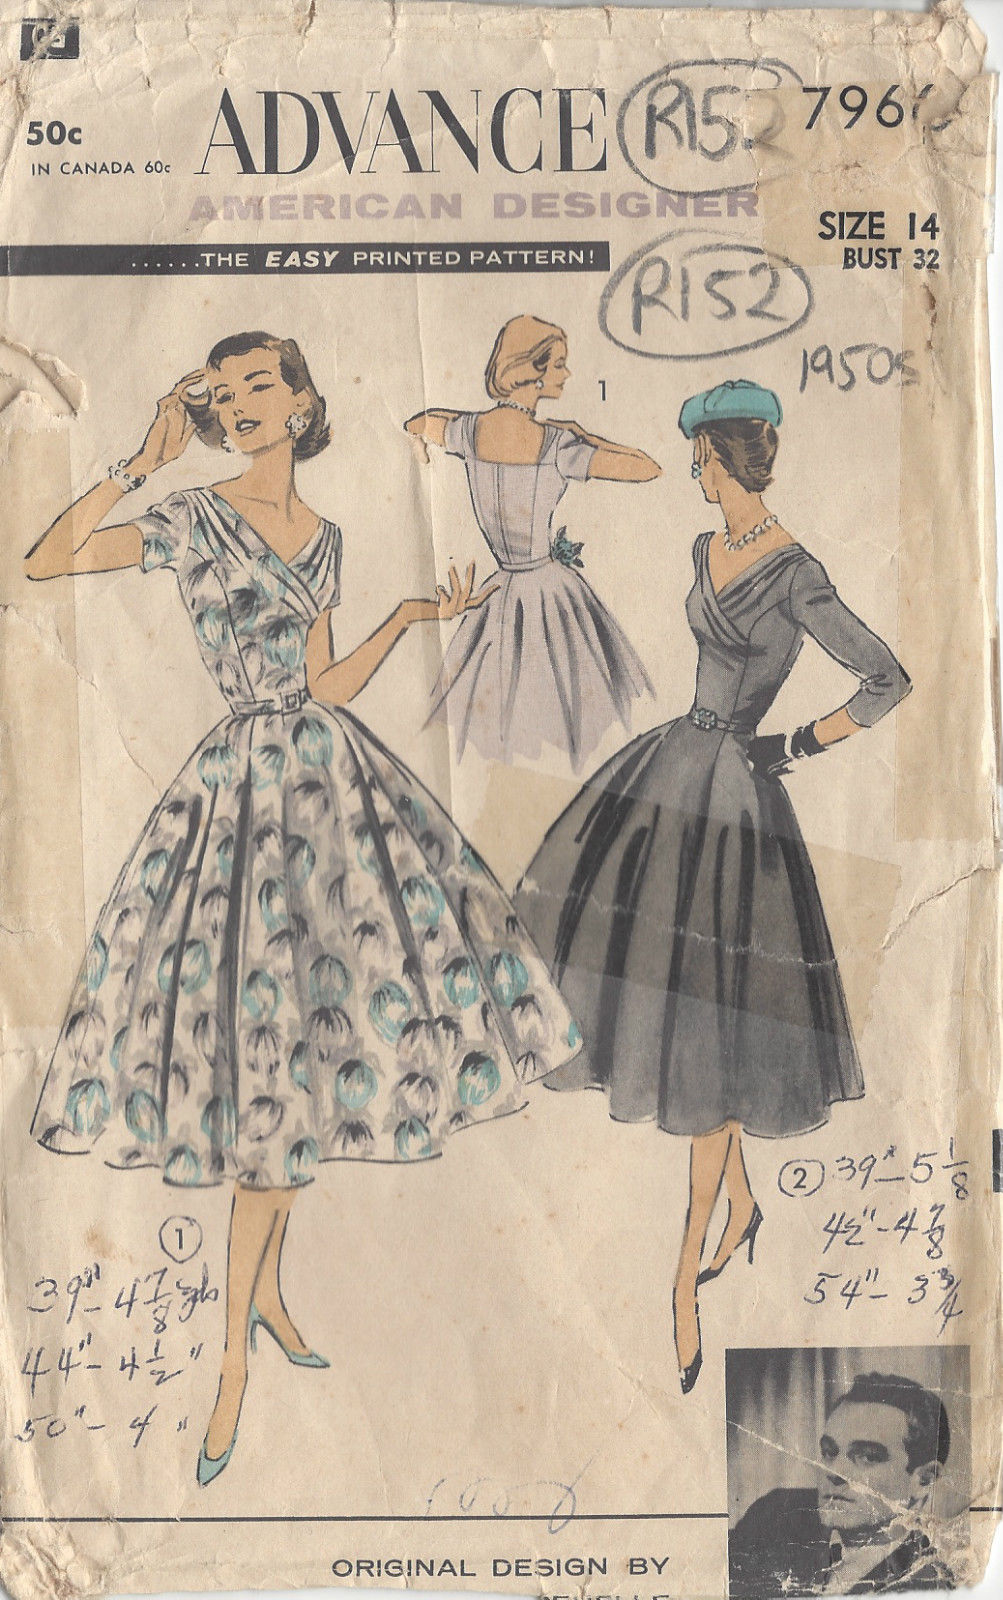 1950s Vintage Sewing Pattern B32 DRESS (R152) By Advance 7966 By